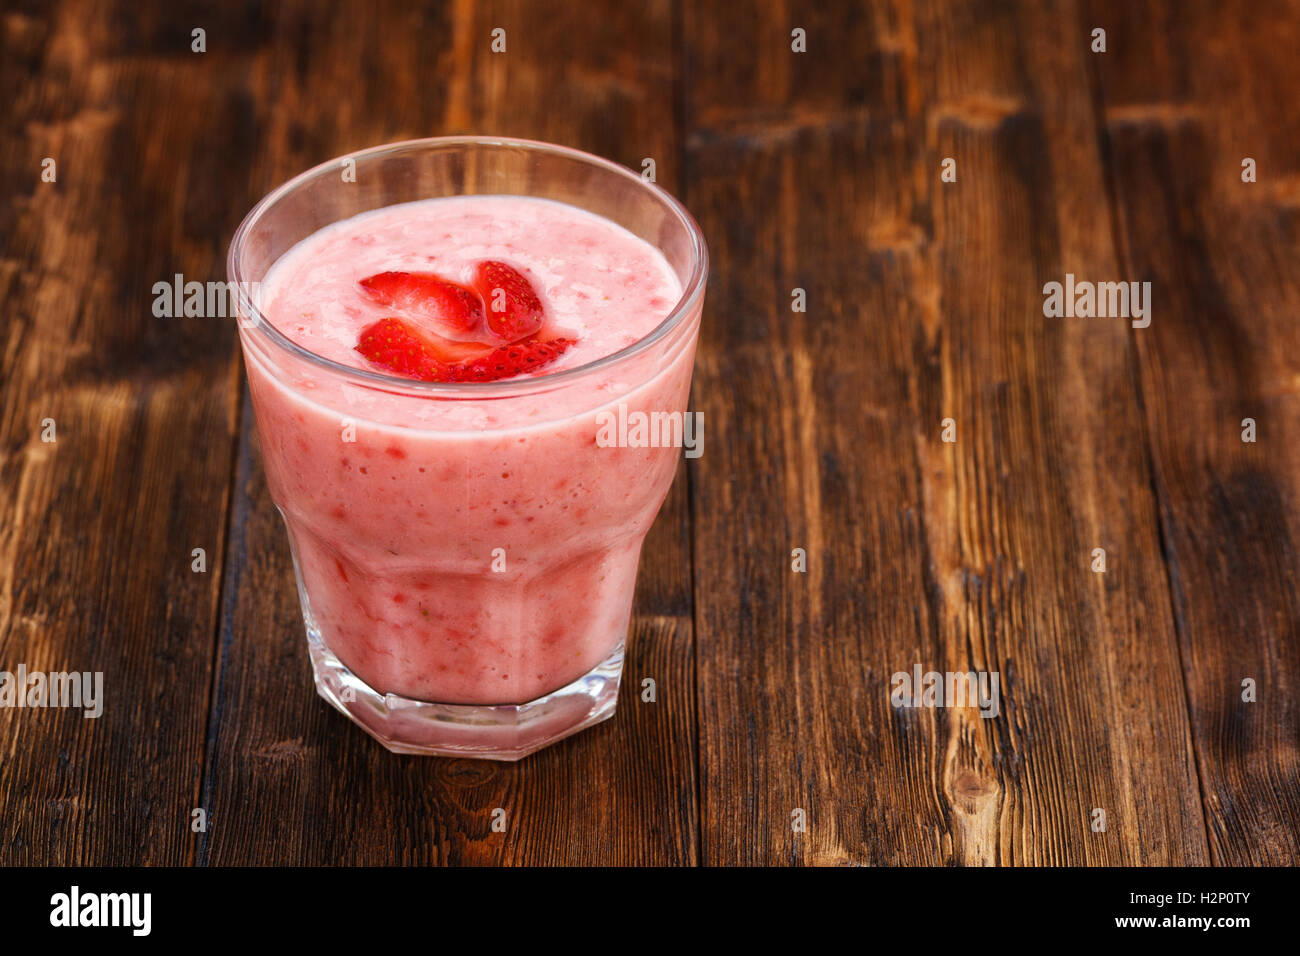 Strawberry milk smoothie in a glass, wooden background Stock Photo